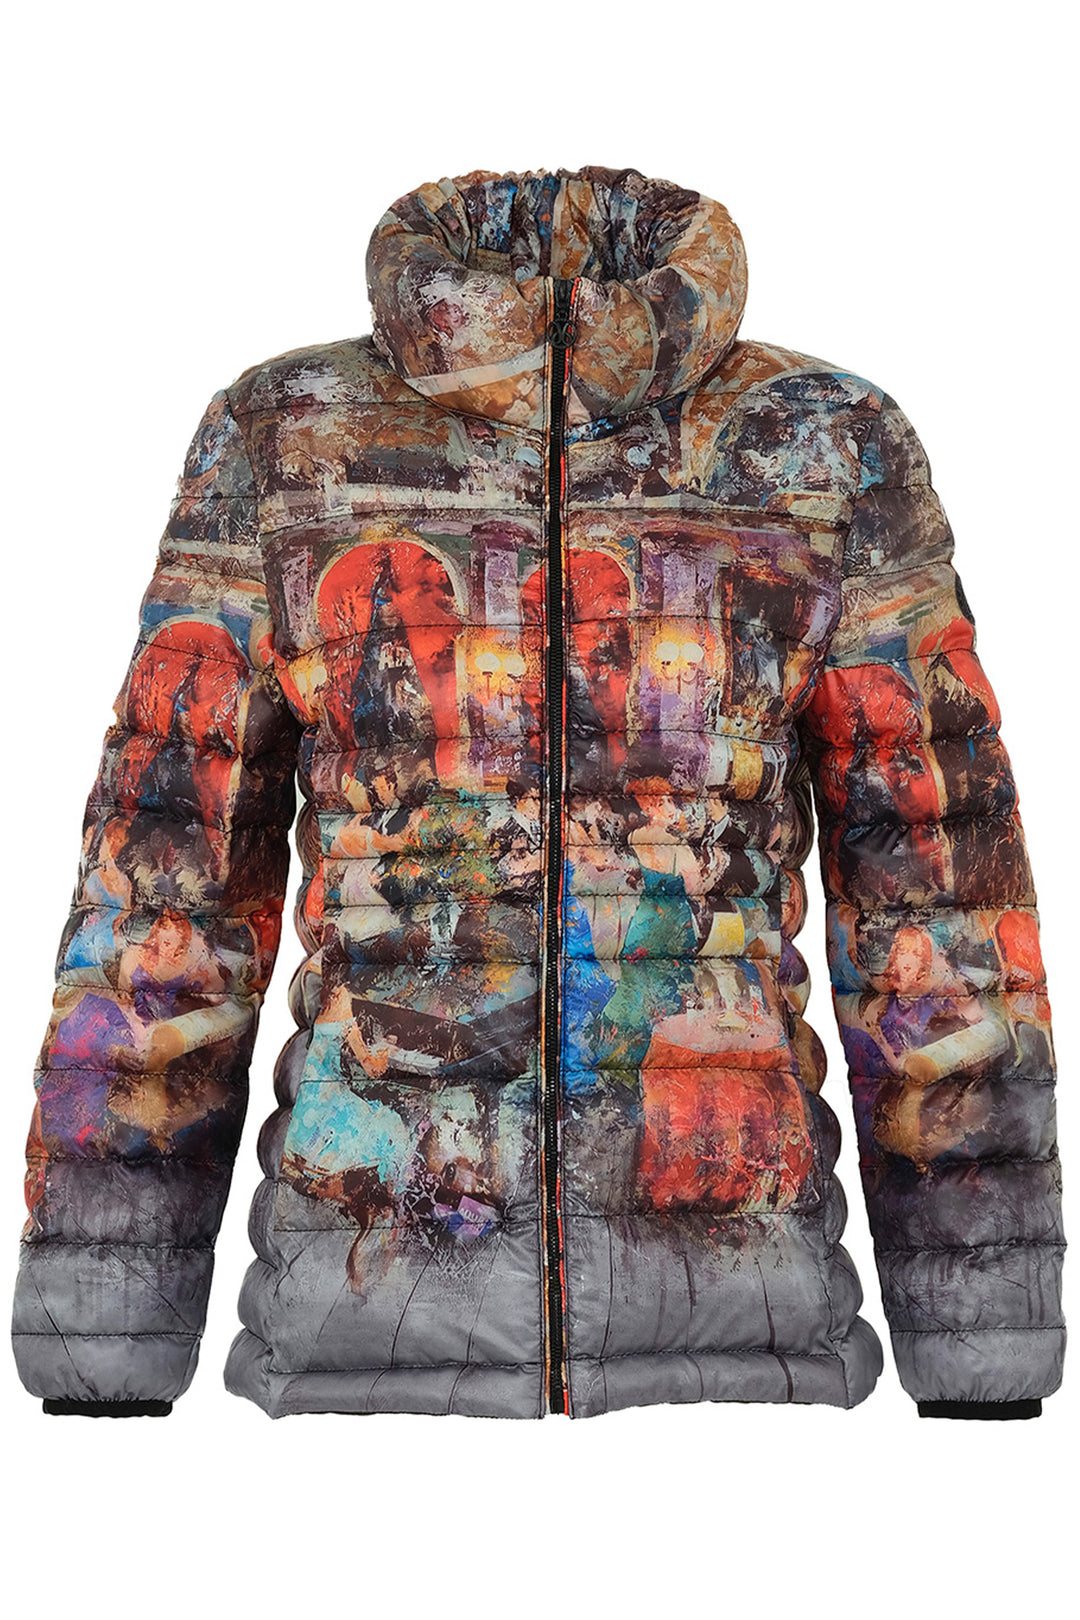 Its all-over print design and lightly padded fabric keep you fashionable and insulated on chilly fall and winter days.